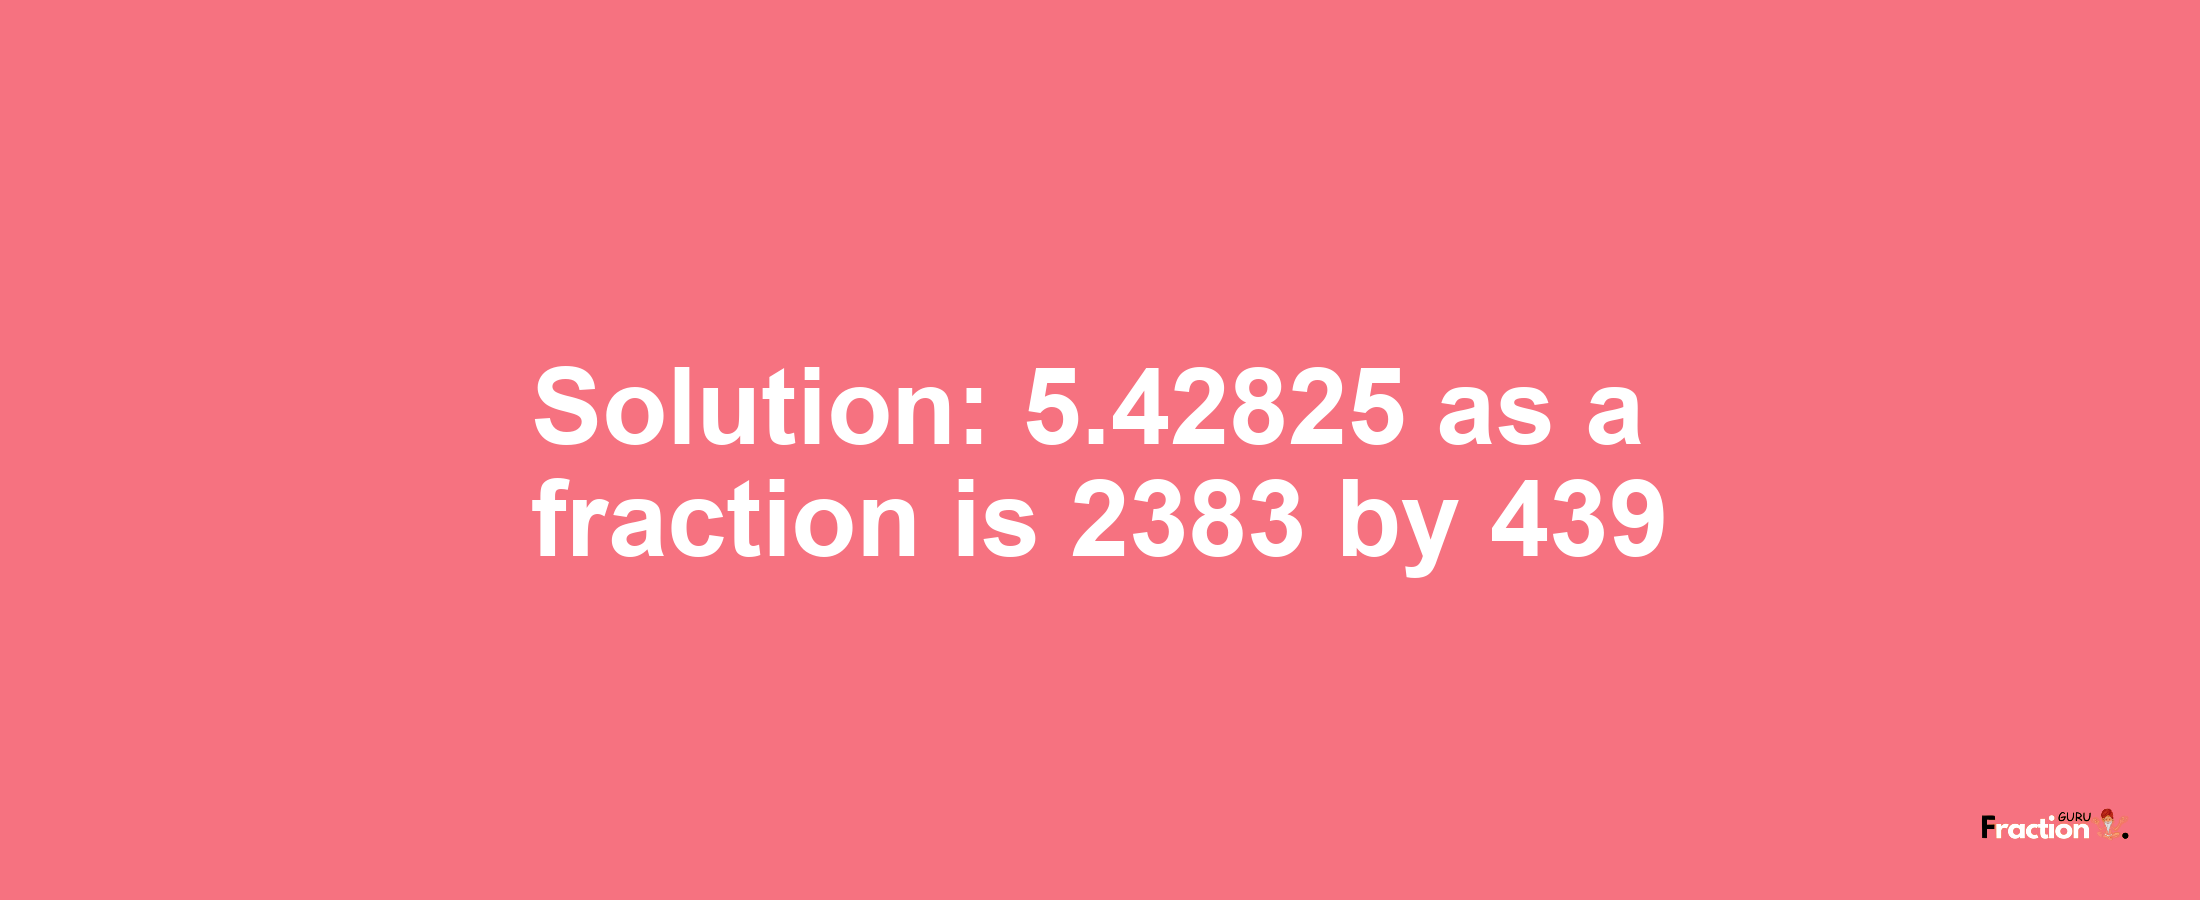 Solution:5.42825 as a fraction is 2383/439